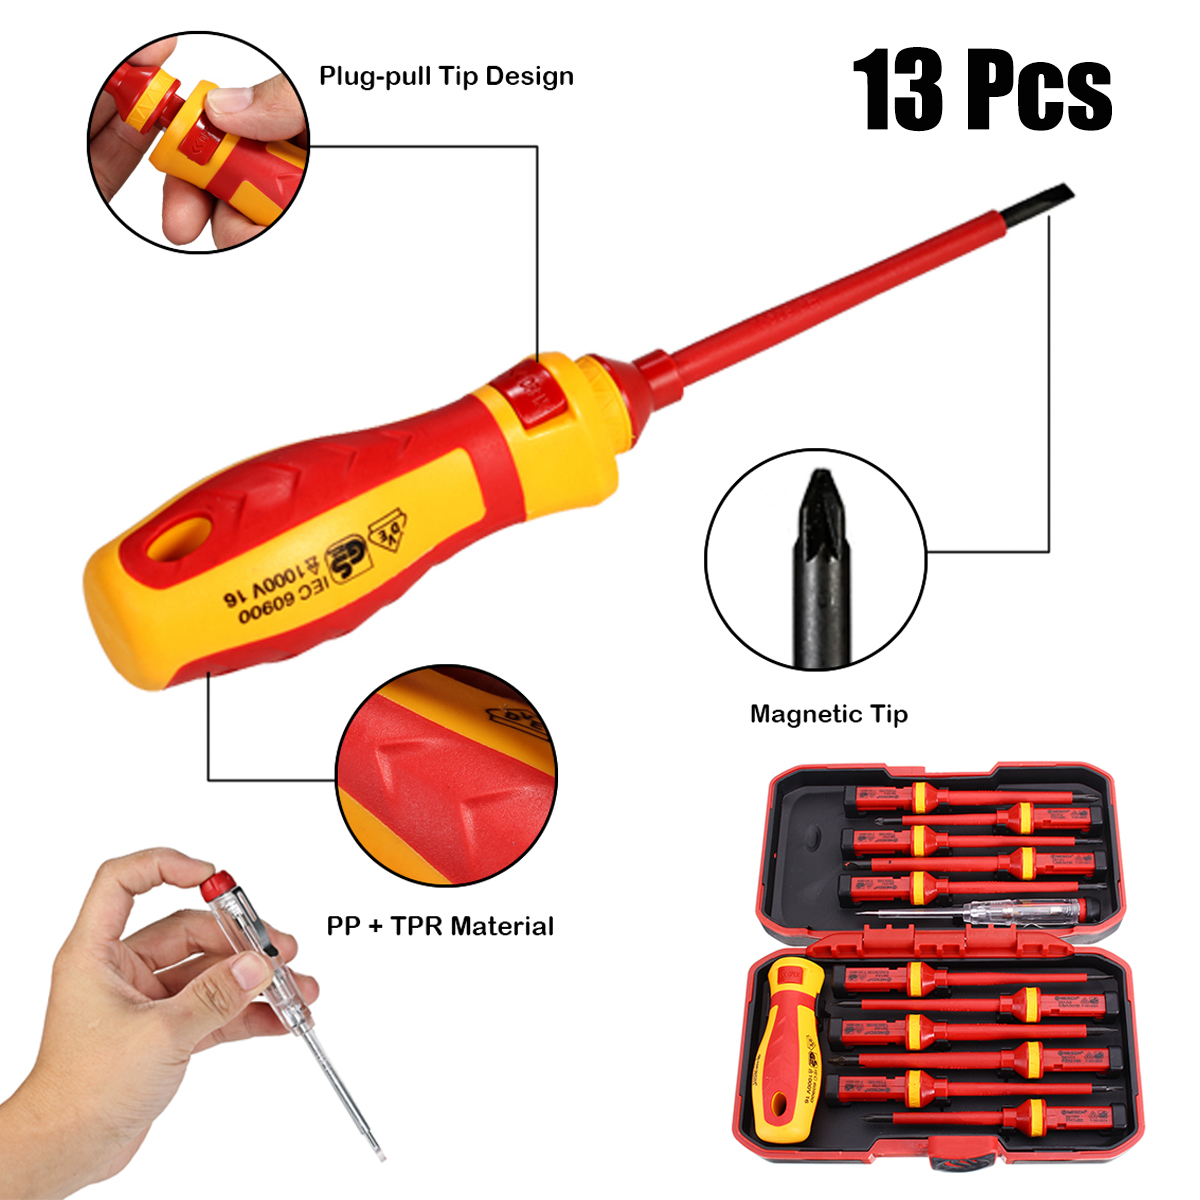 13Pcs 1000V Electronic Insulated Screwdriver Set Phillips Slotted Torx CR-V Screwdriver Repair Tools 65